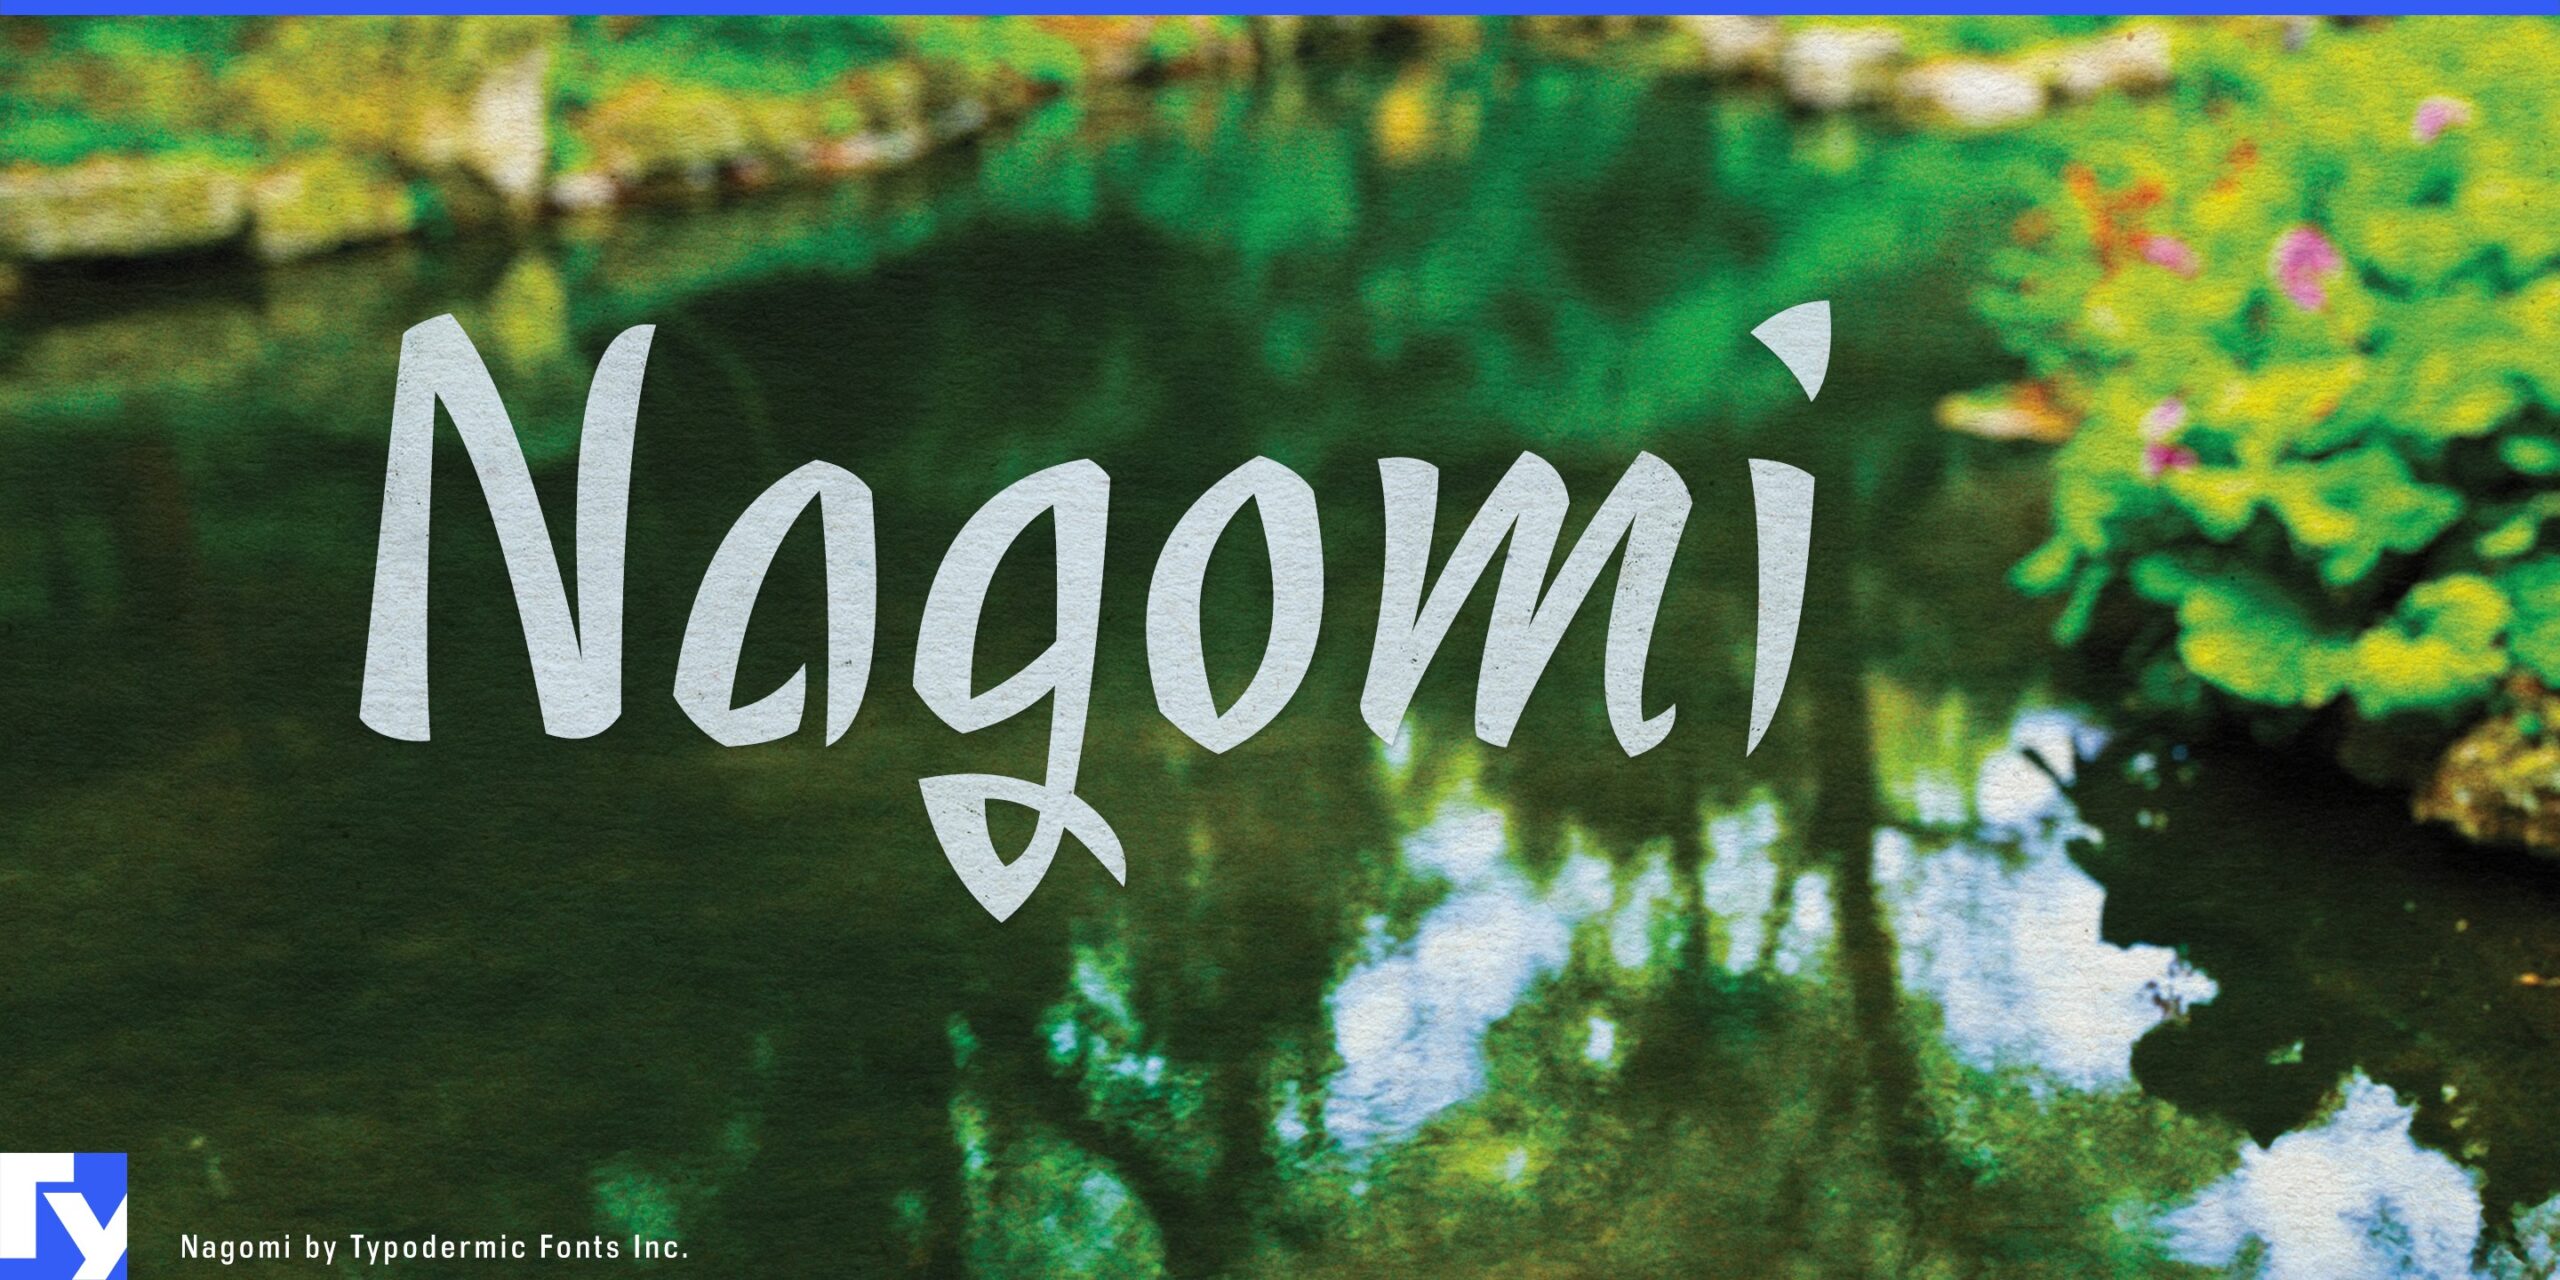 Dive into the Organic Feel of Nagomi Typeface